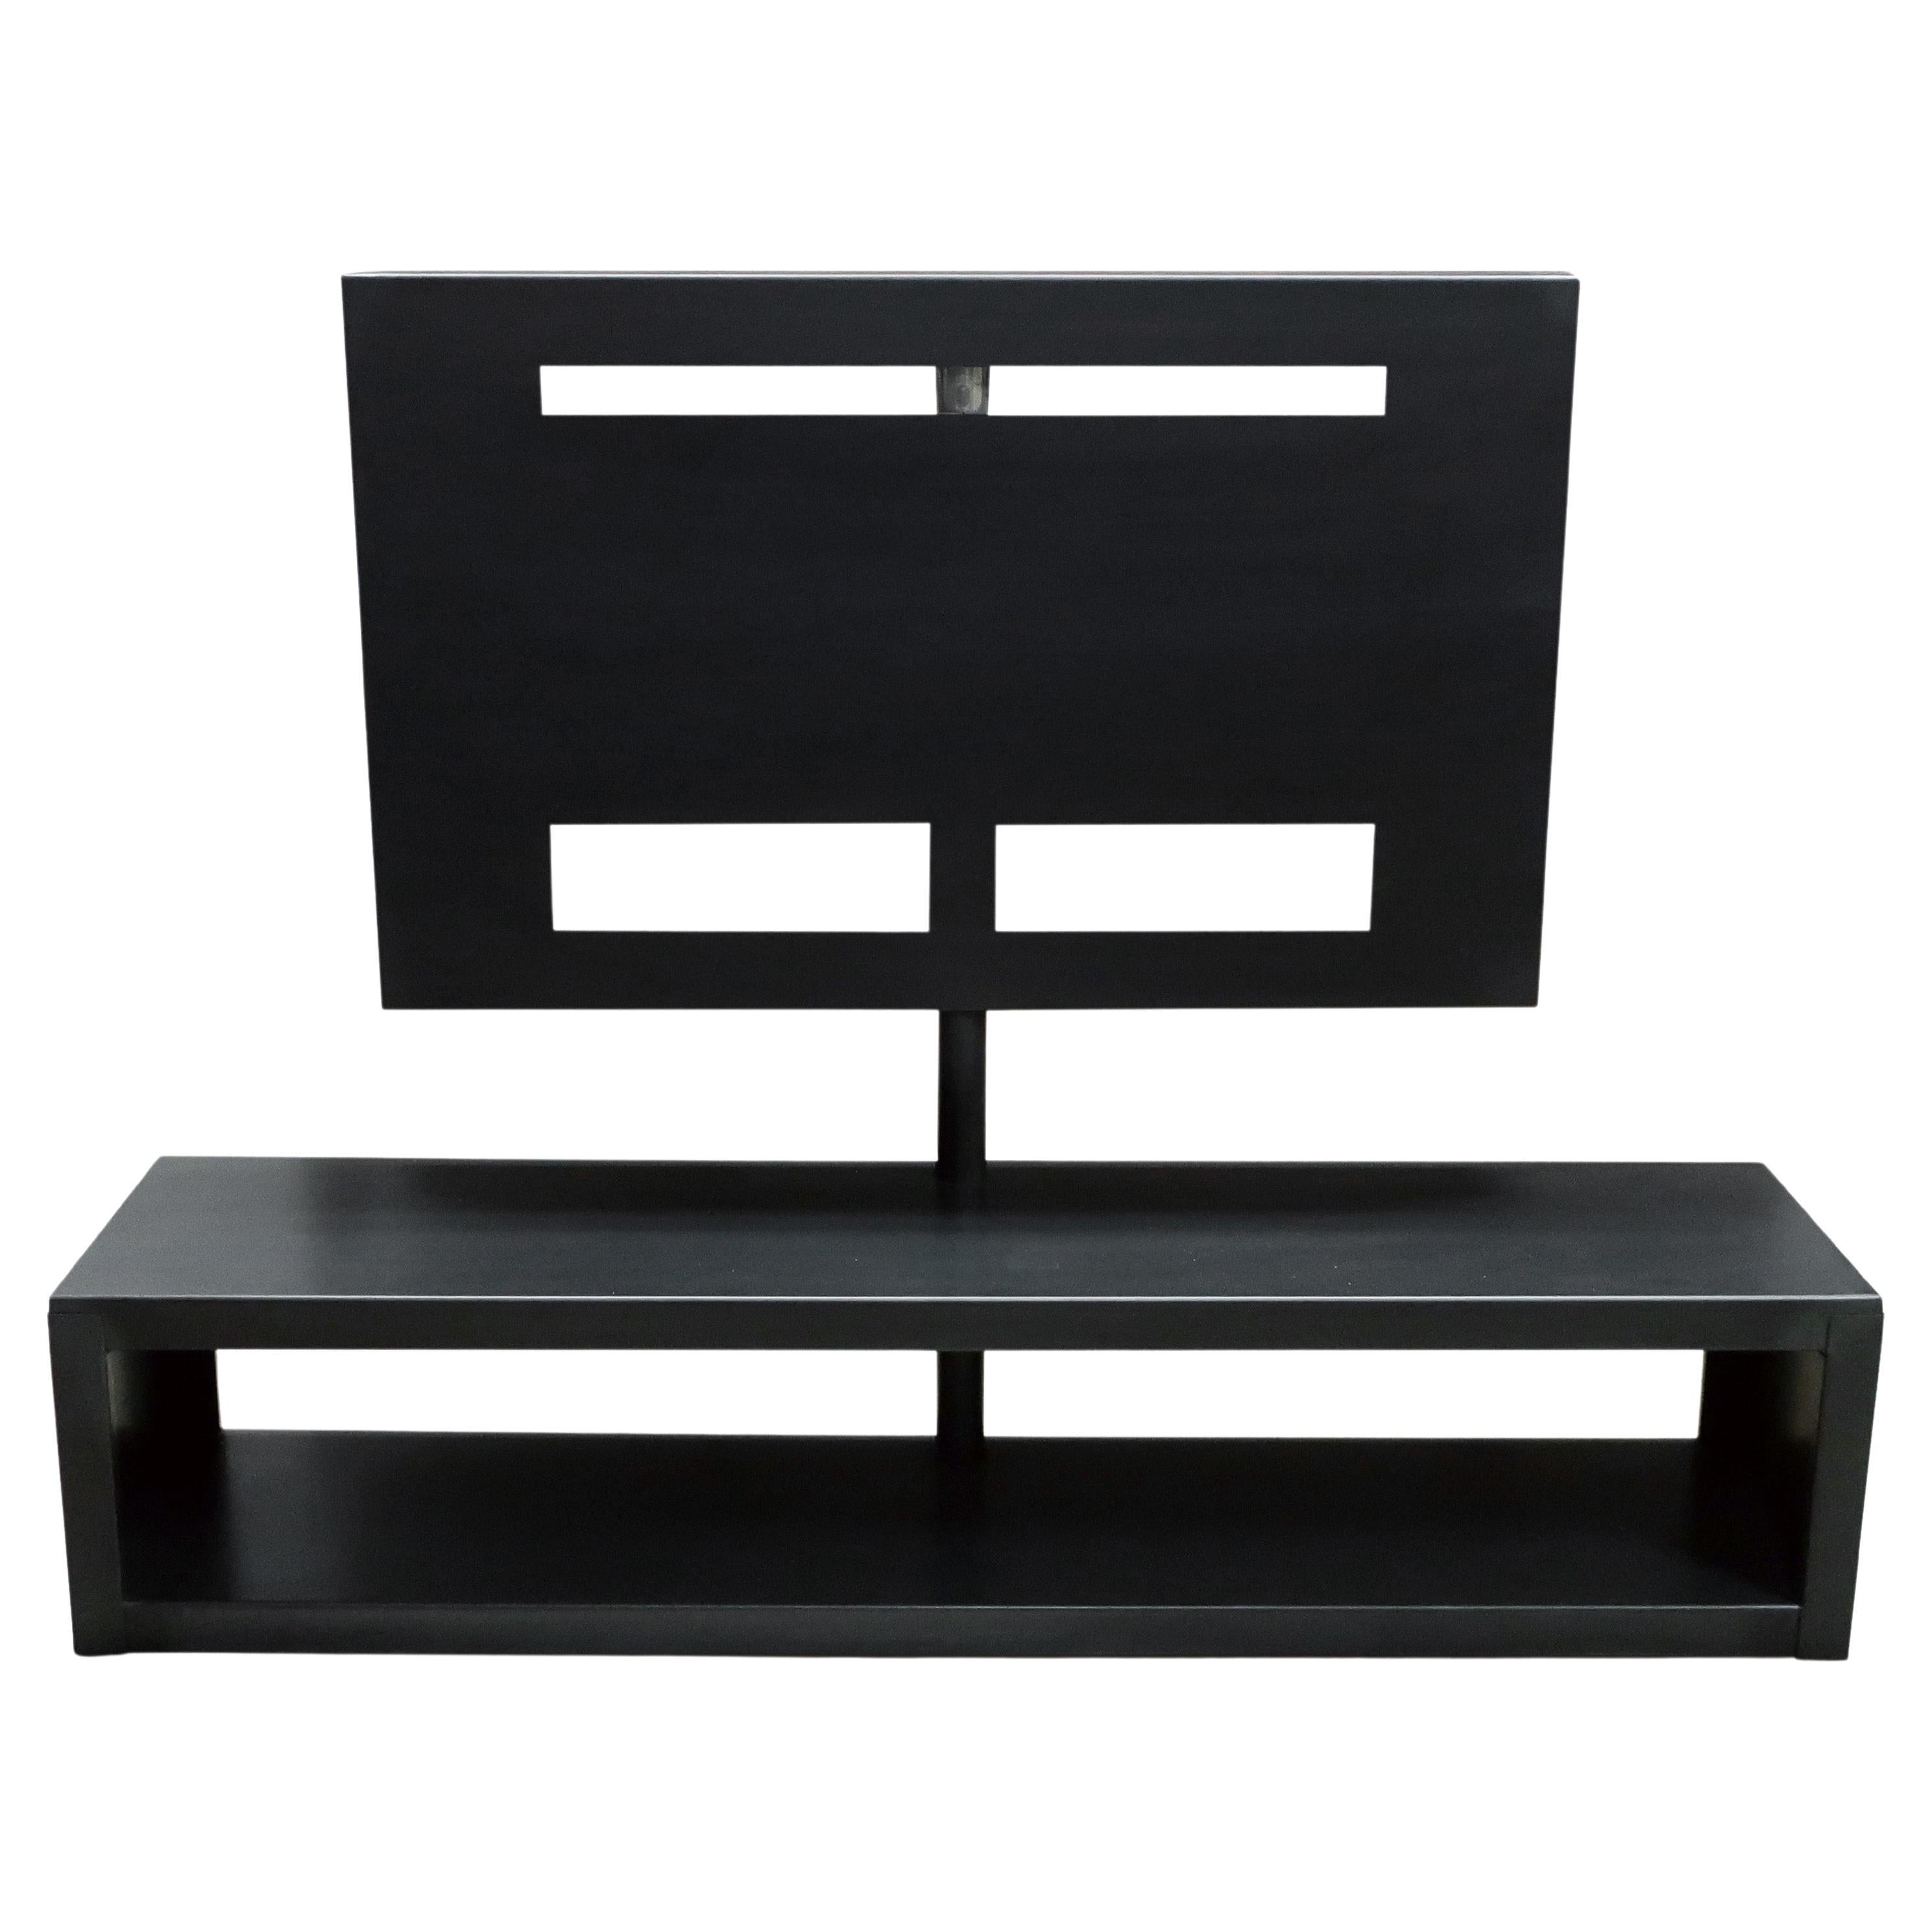 Big Irony Tv Stand and Console by Maurizio Peregalli for Zeus For Sale